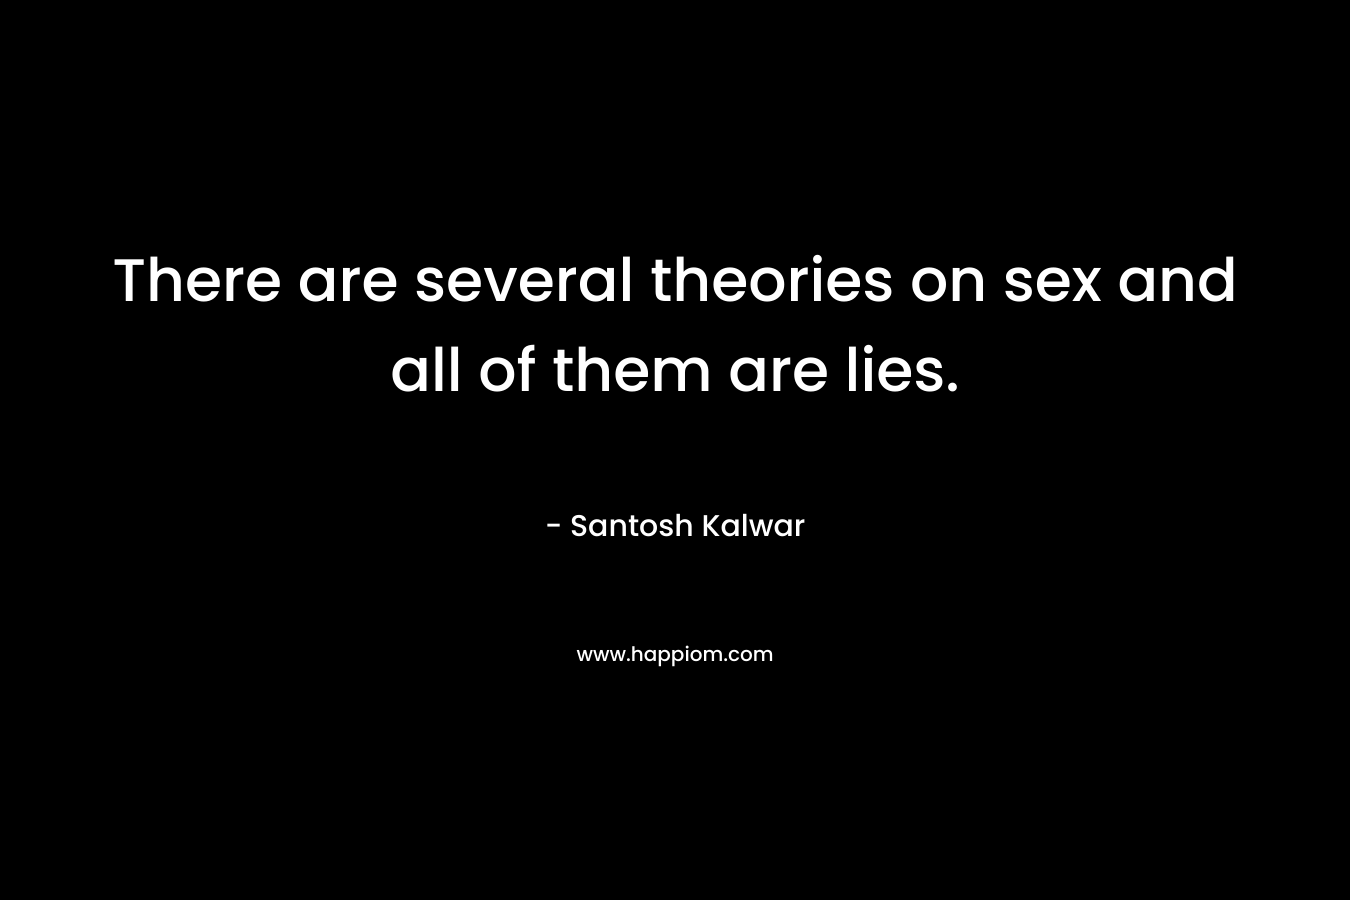 There are several theories on sex and all of them are lies.